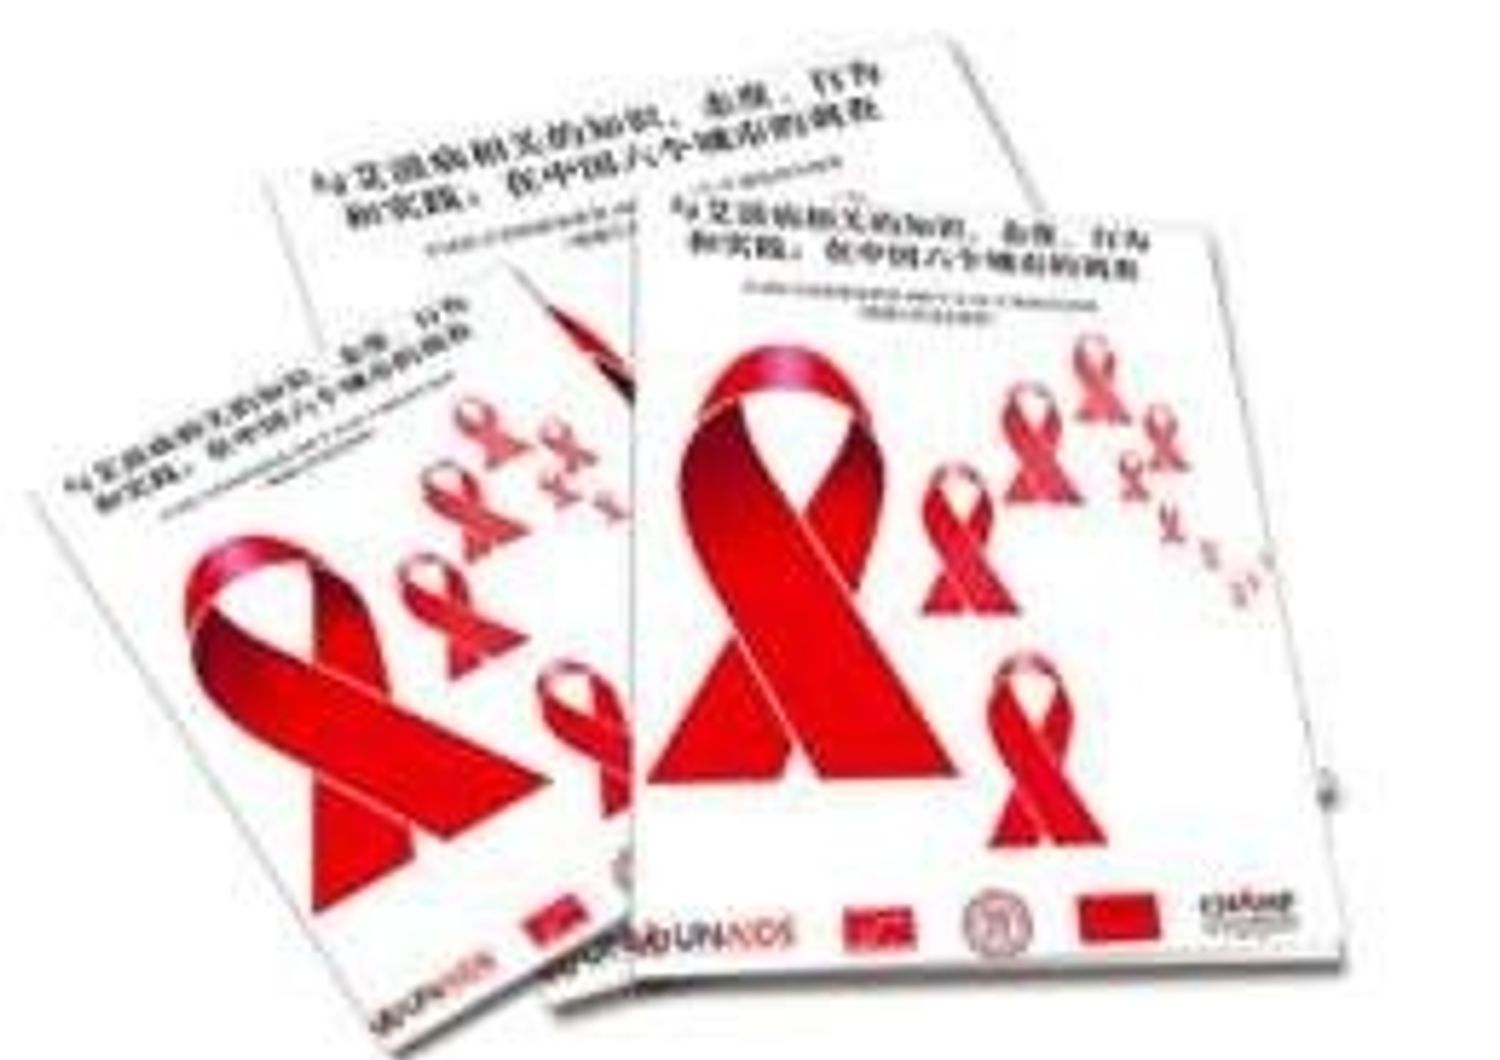 AIDS: HU JINTAO SCENDE IN CAMPO